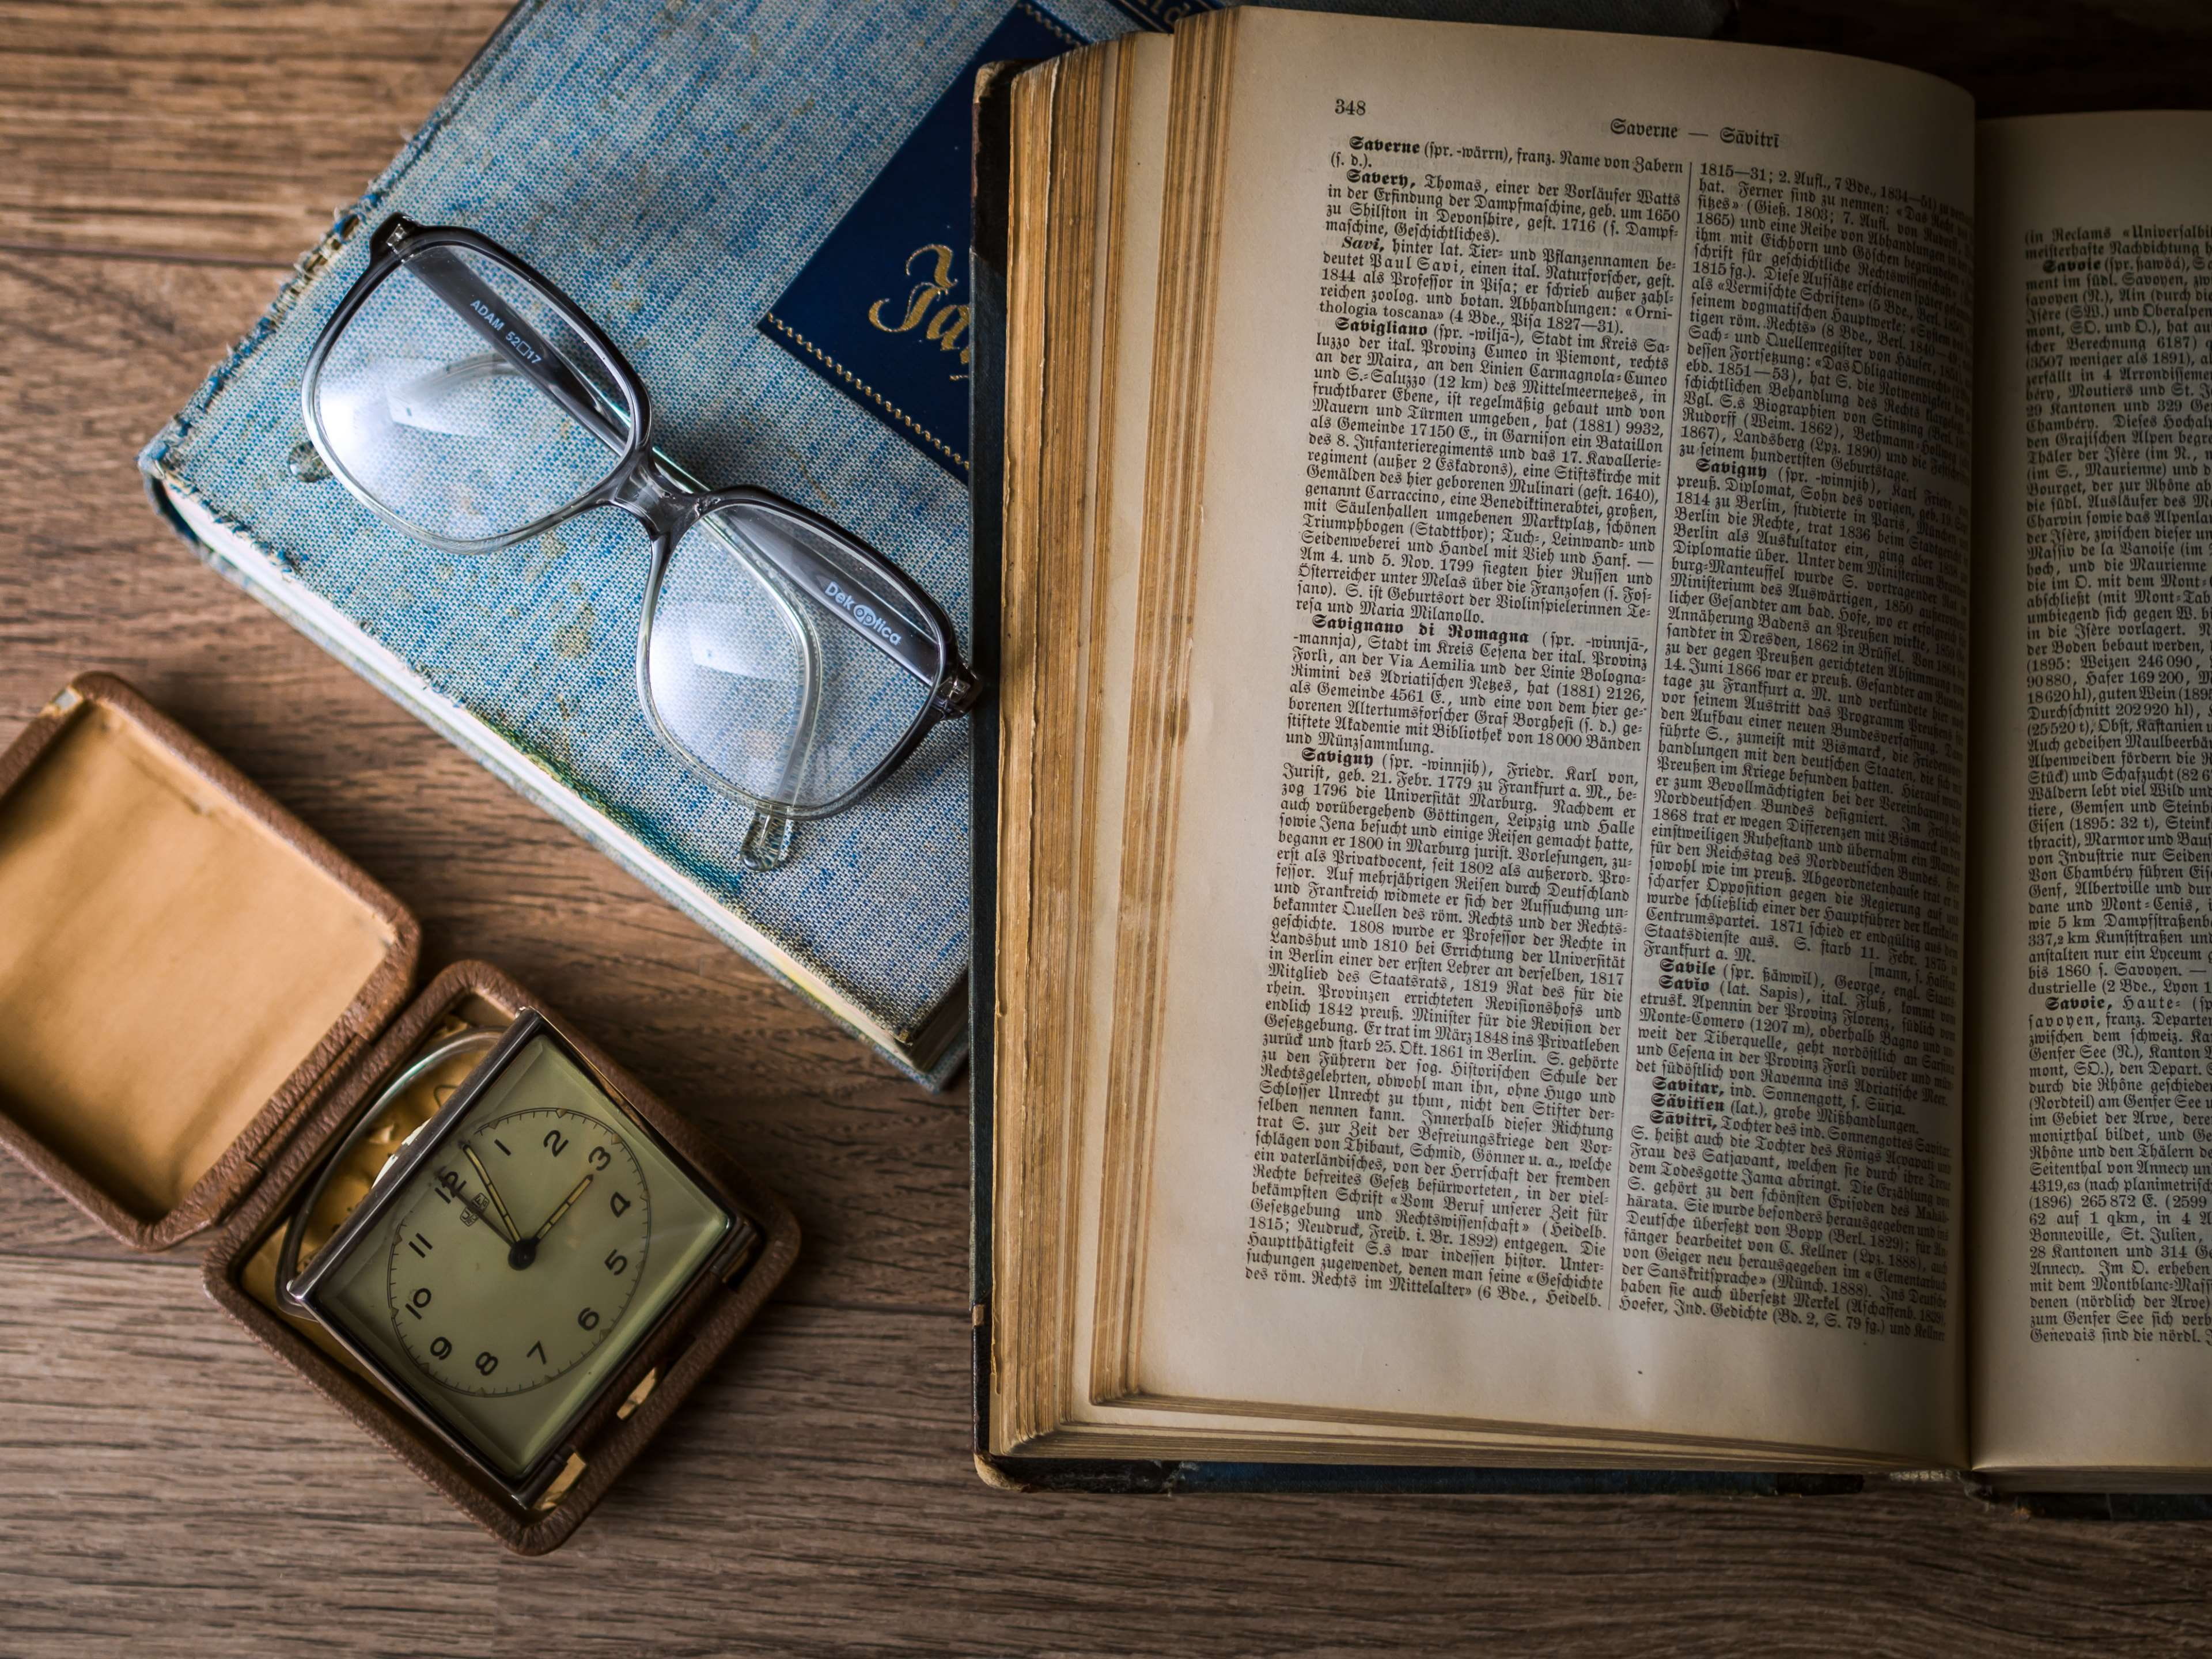 antique, book, glasses, learning, old, research, retro, study